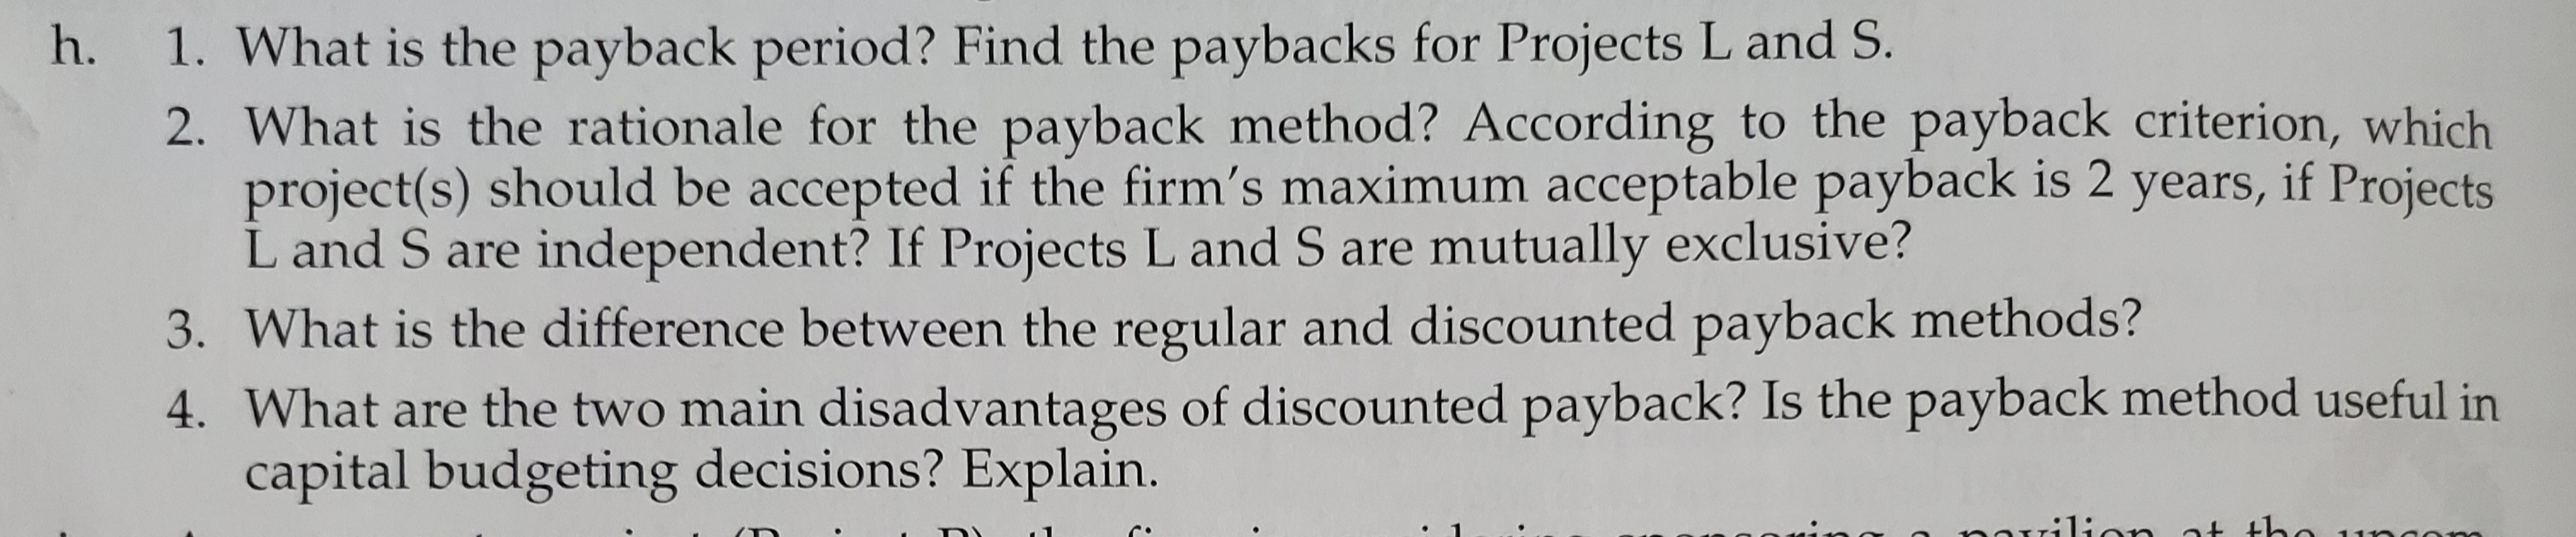 1. What is the payback period? Find the paybacks for Projects L and S.
2. What is the rationale for the payback method? According to the payback criterion, which
project(s) should be accepted if the firm's maximum acceptable payback is 2 years, if Projects
L and S are independent? If Projects L and S are mutually exclusive?
3. What is the difference between the regular and discounted payback methods?
